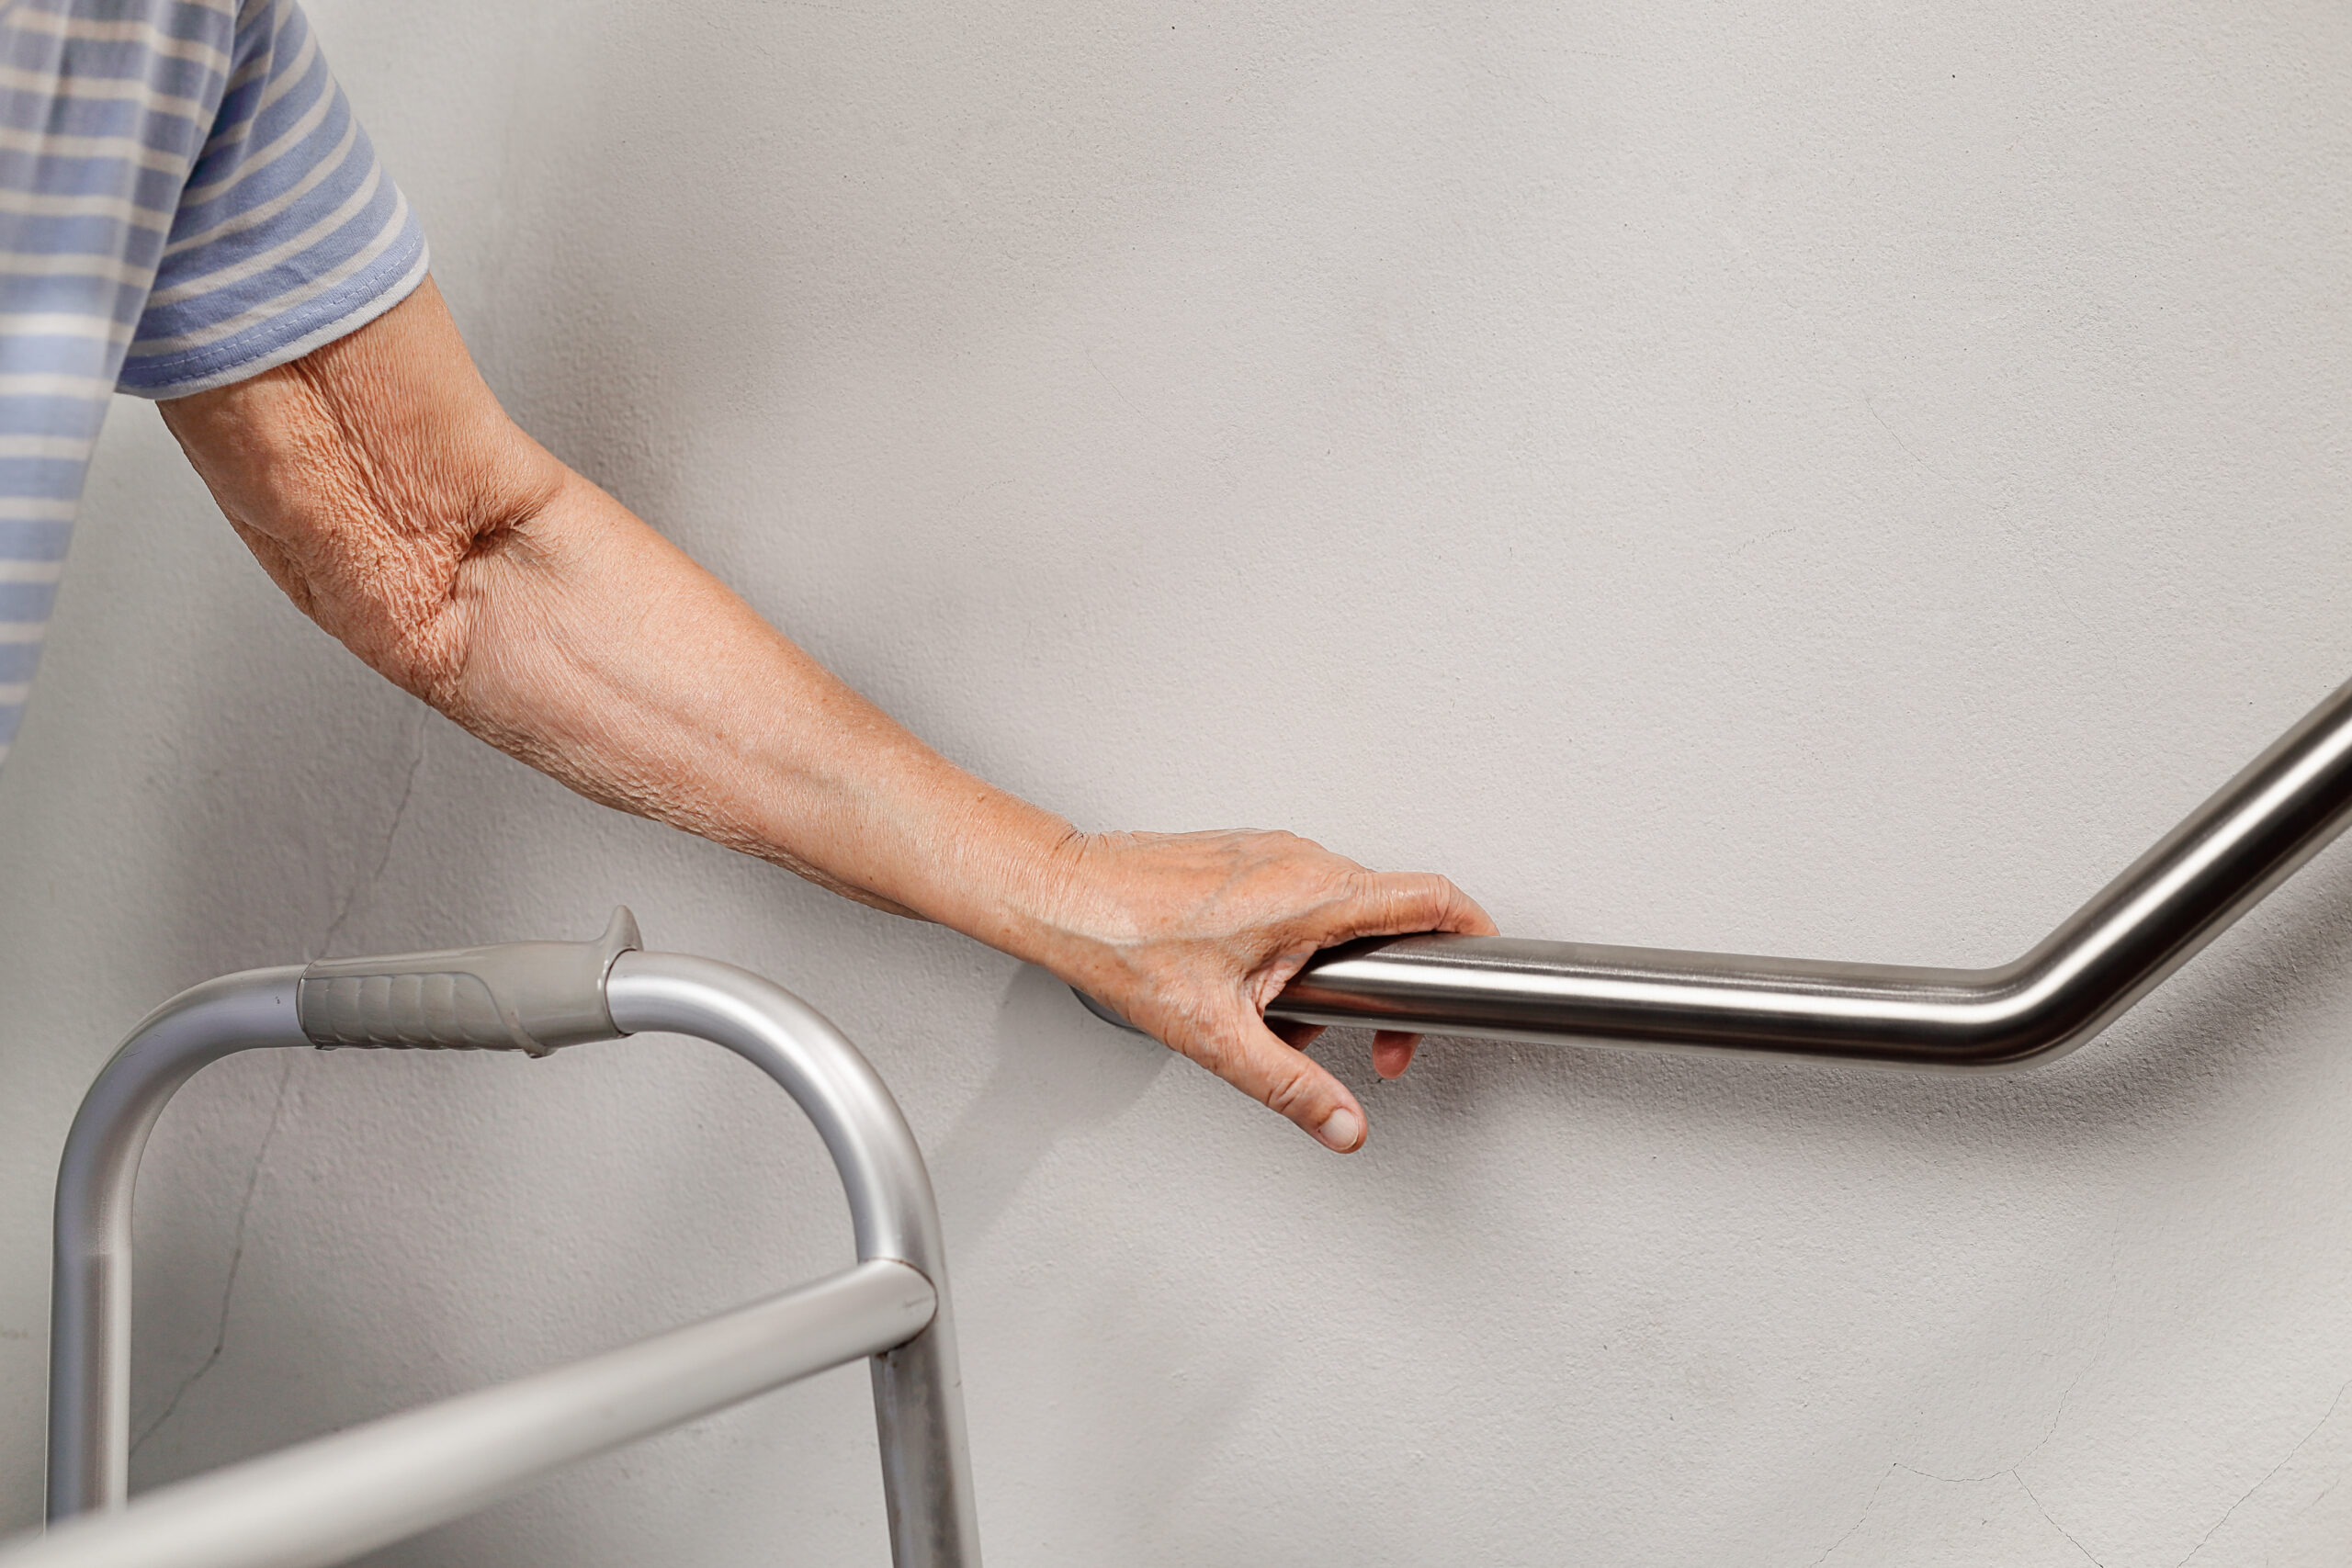  7 Very Important Steps to Make Your Home Safe for Seniors